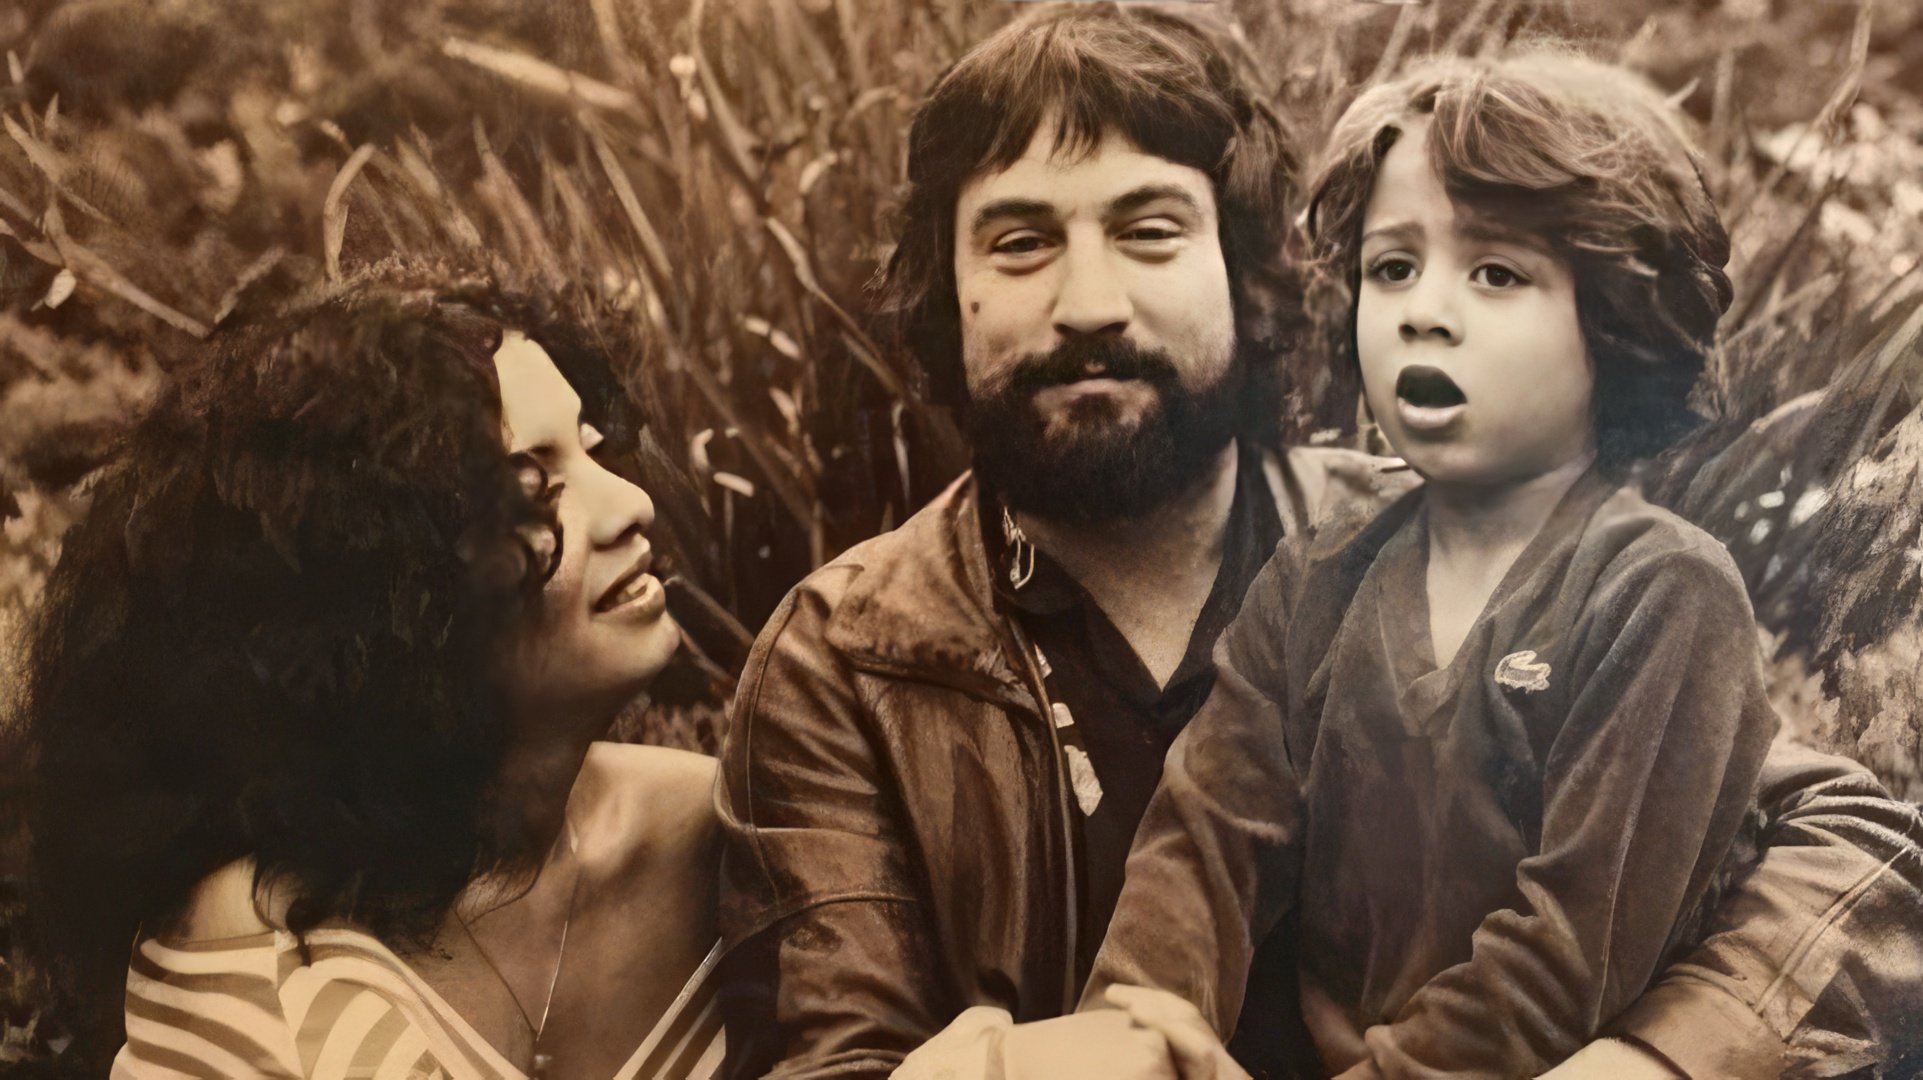 A young Robert De Niro with his first wife and eldest son